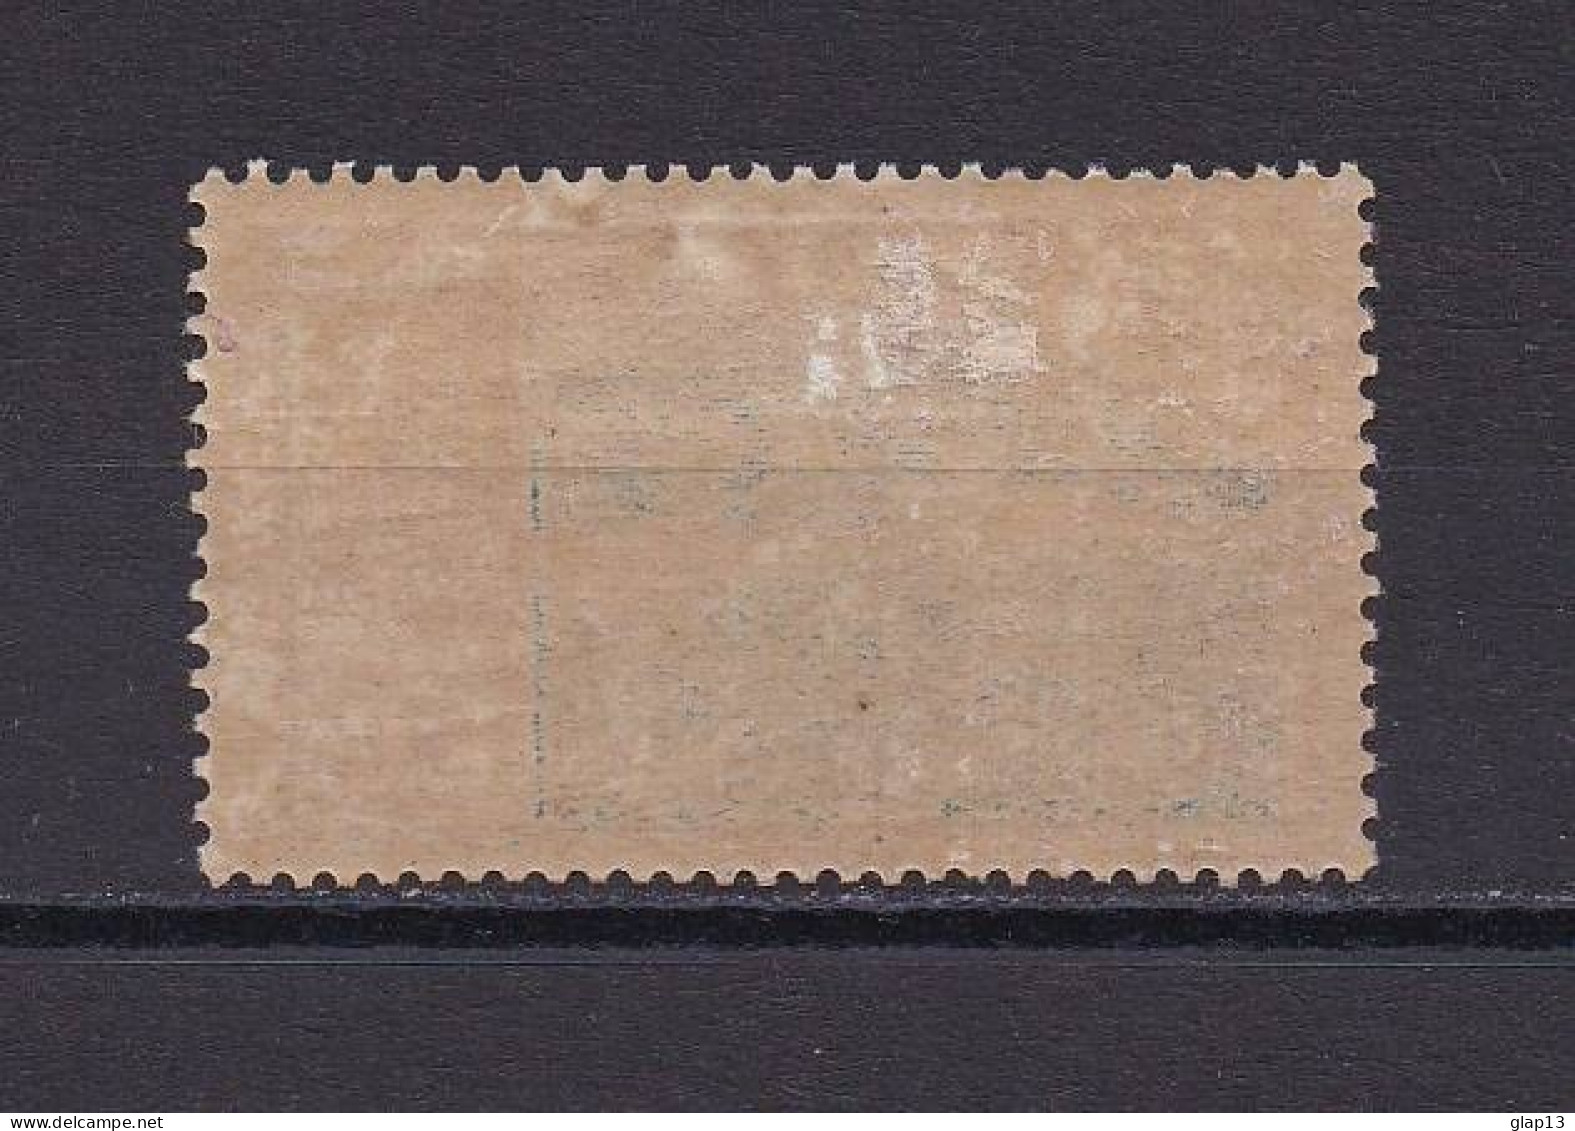 OUBANGUI 1930 TAXE N°16 NEUF AVEC CHARNIERE - Unused Stamps